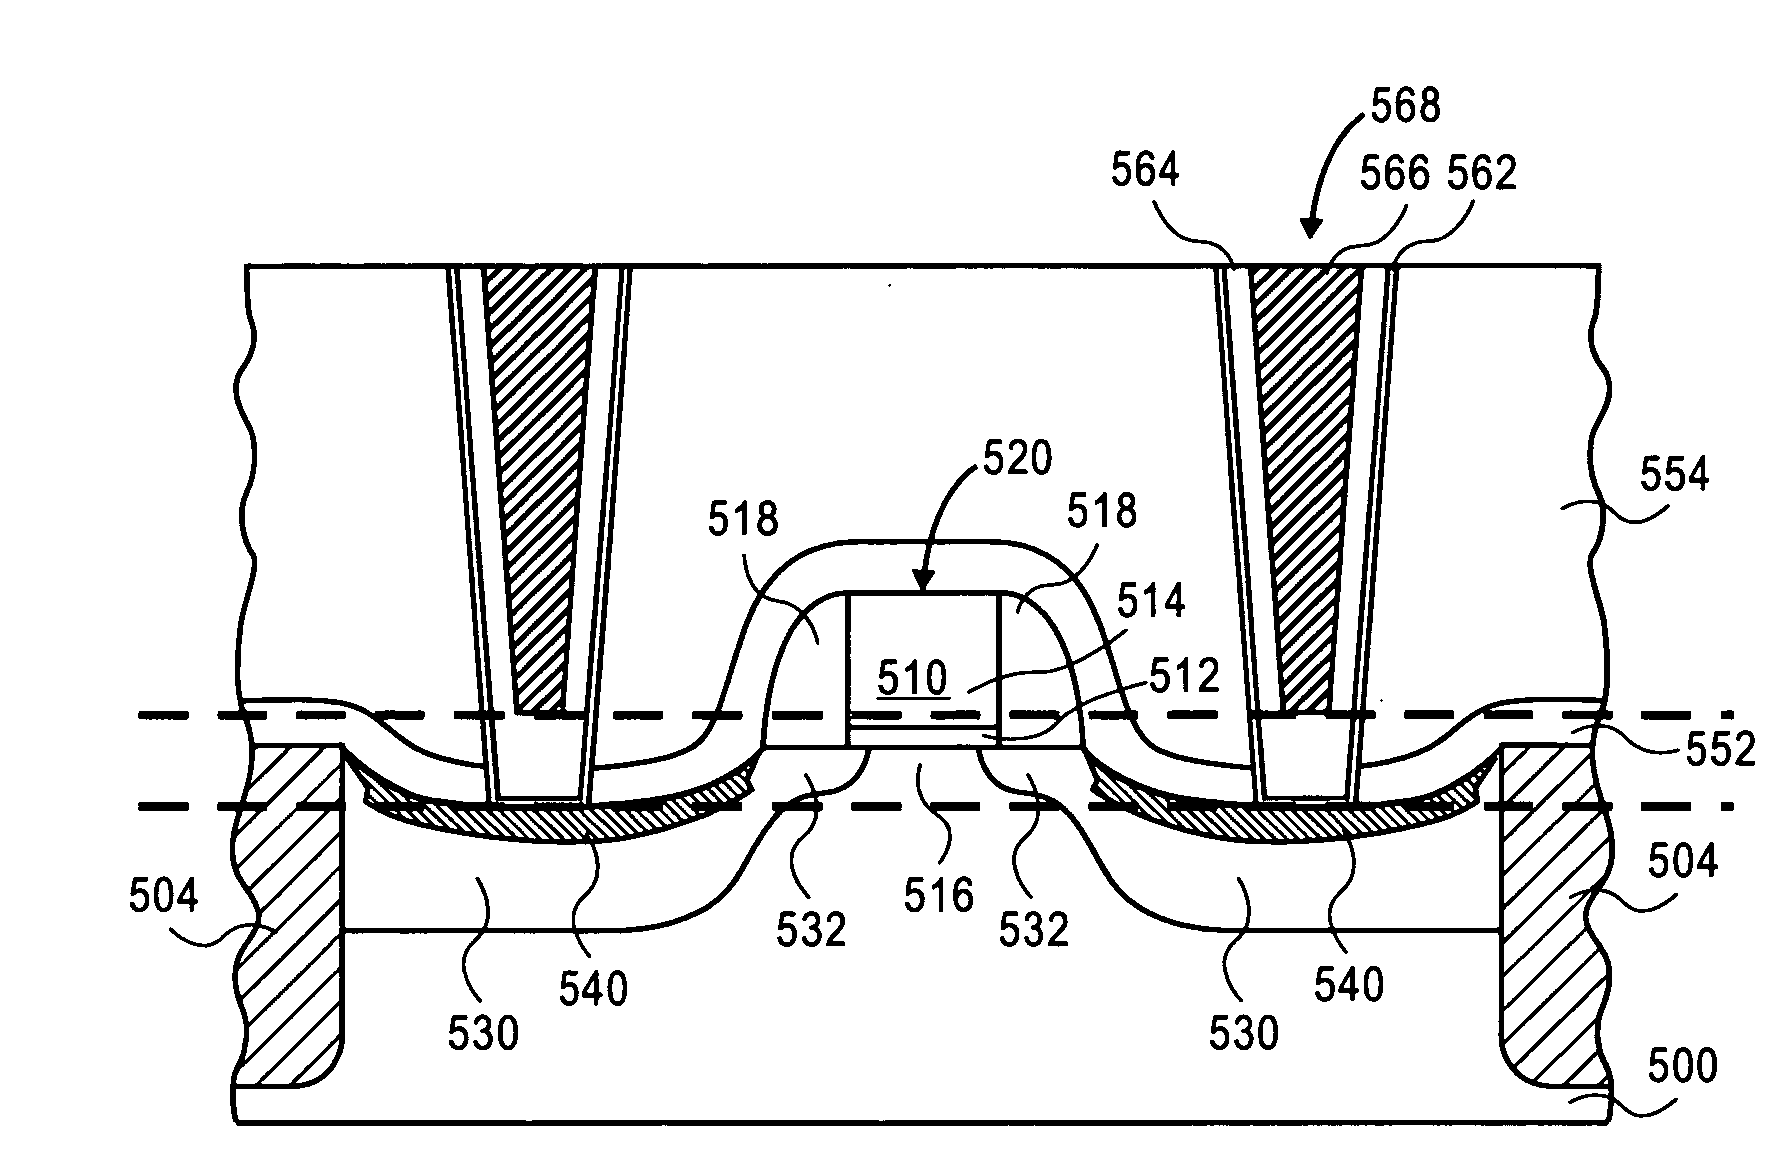 Stressed barrier plug slot contact structure for transistor performance enhancement